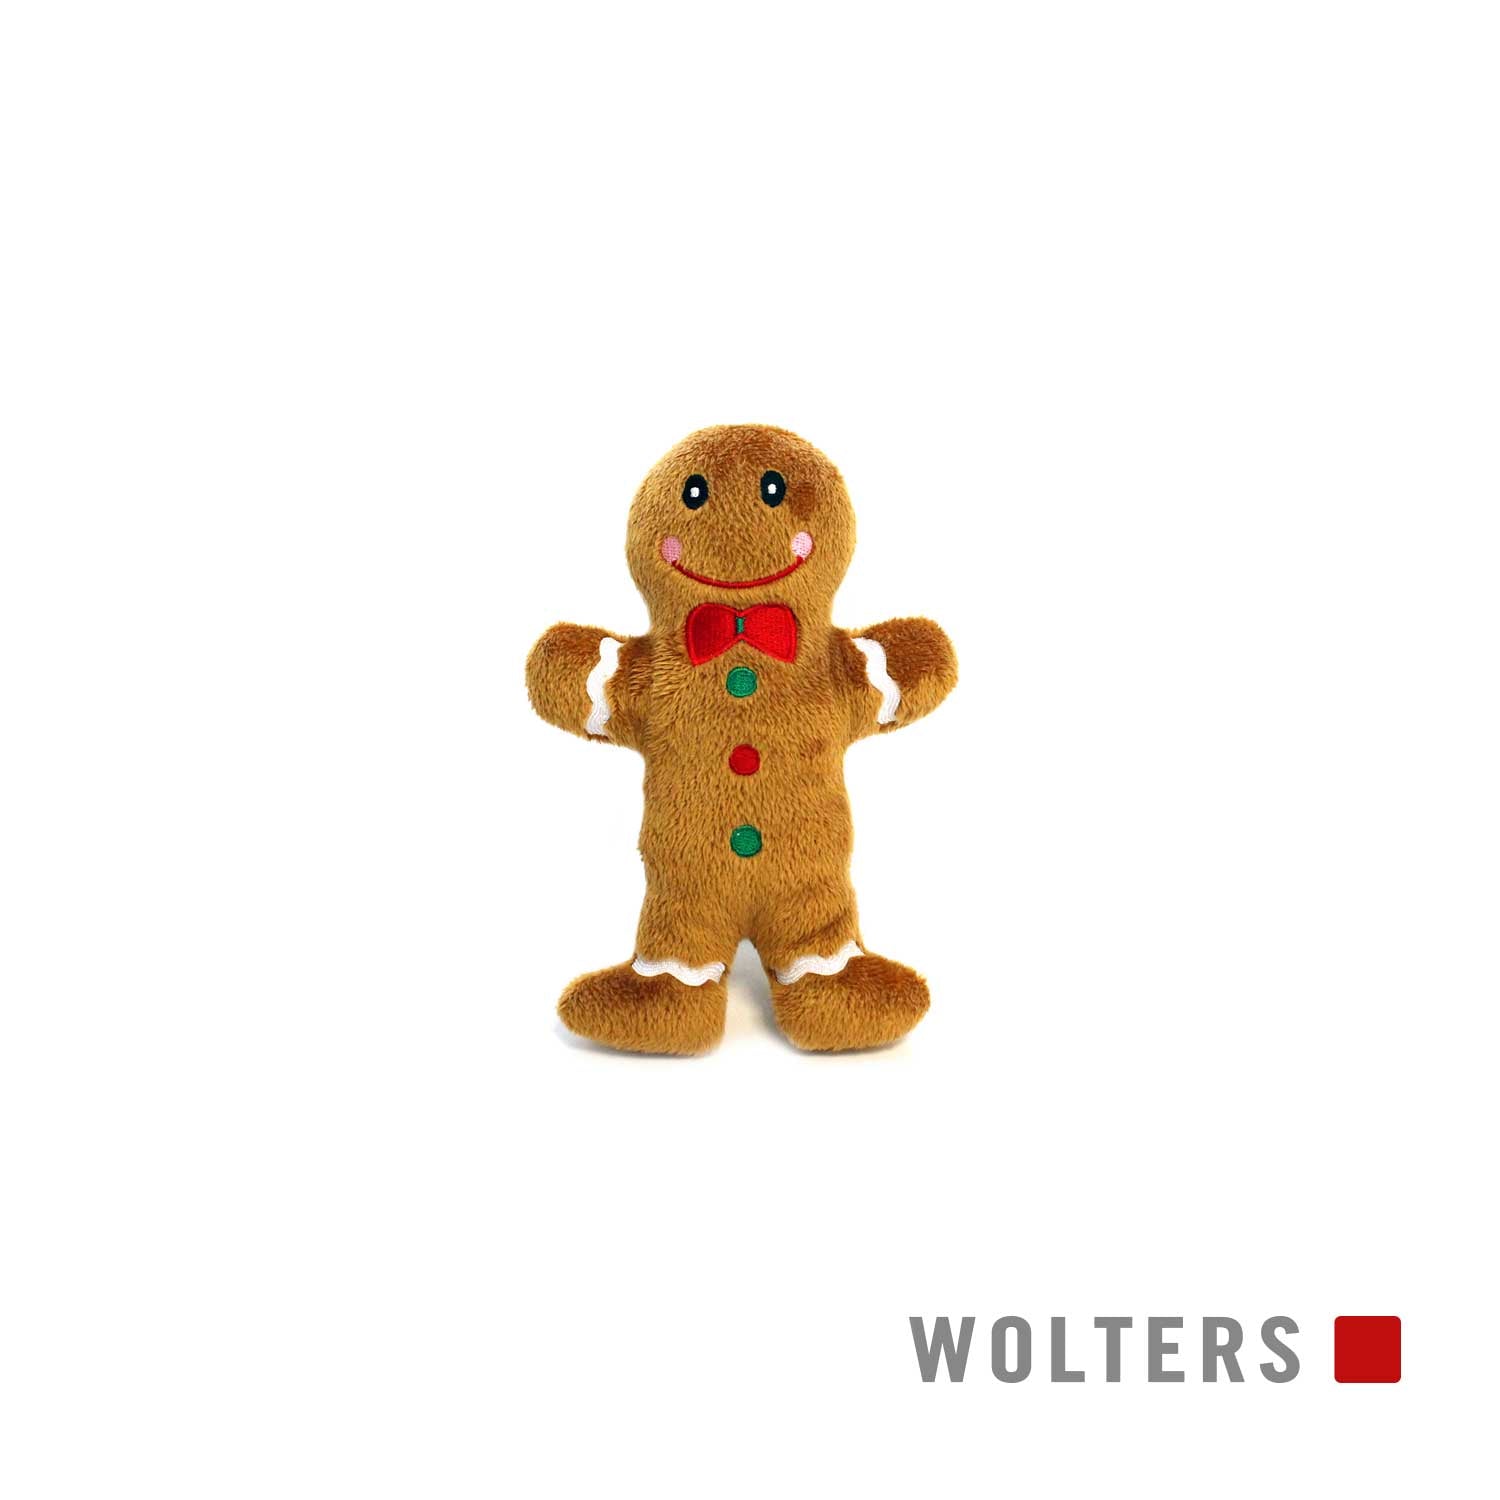 Wolters - "Candy Man" in 18cm